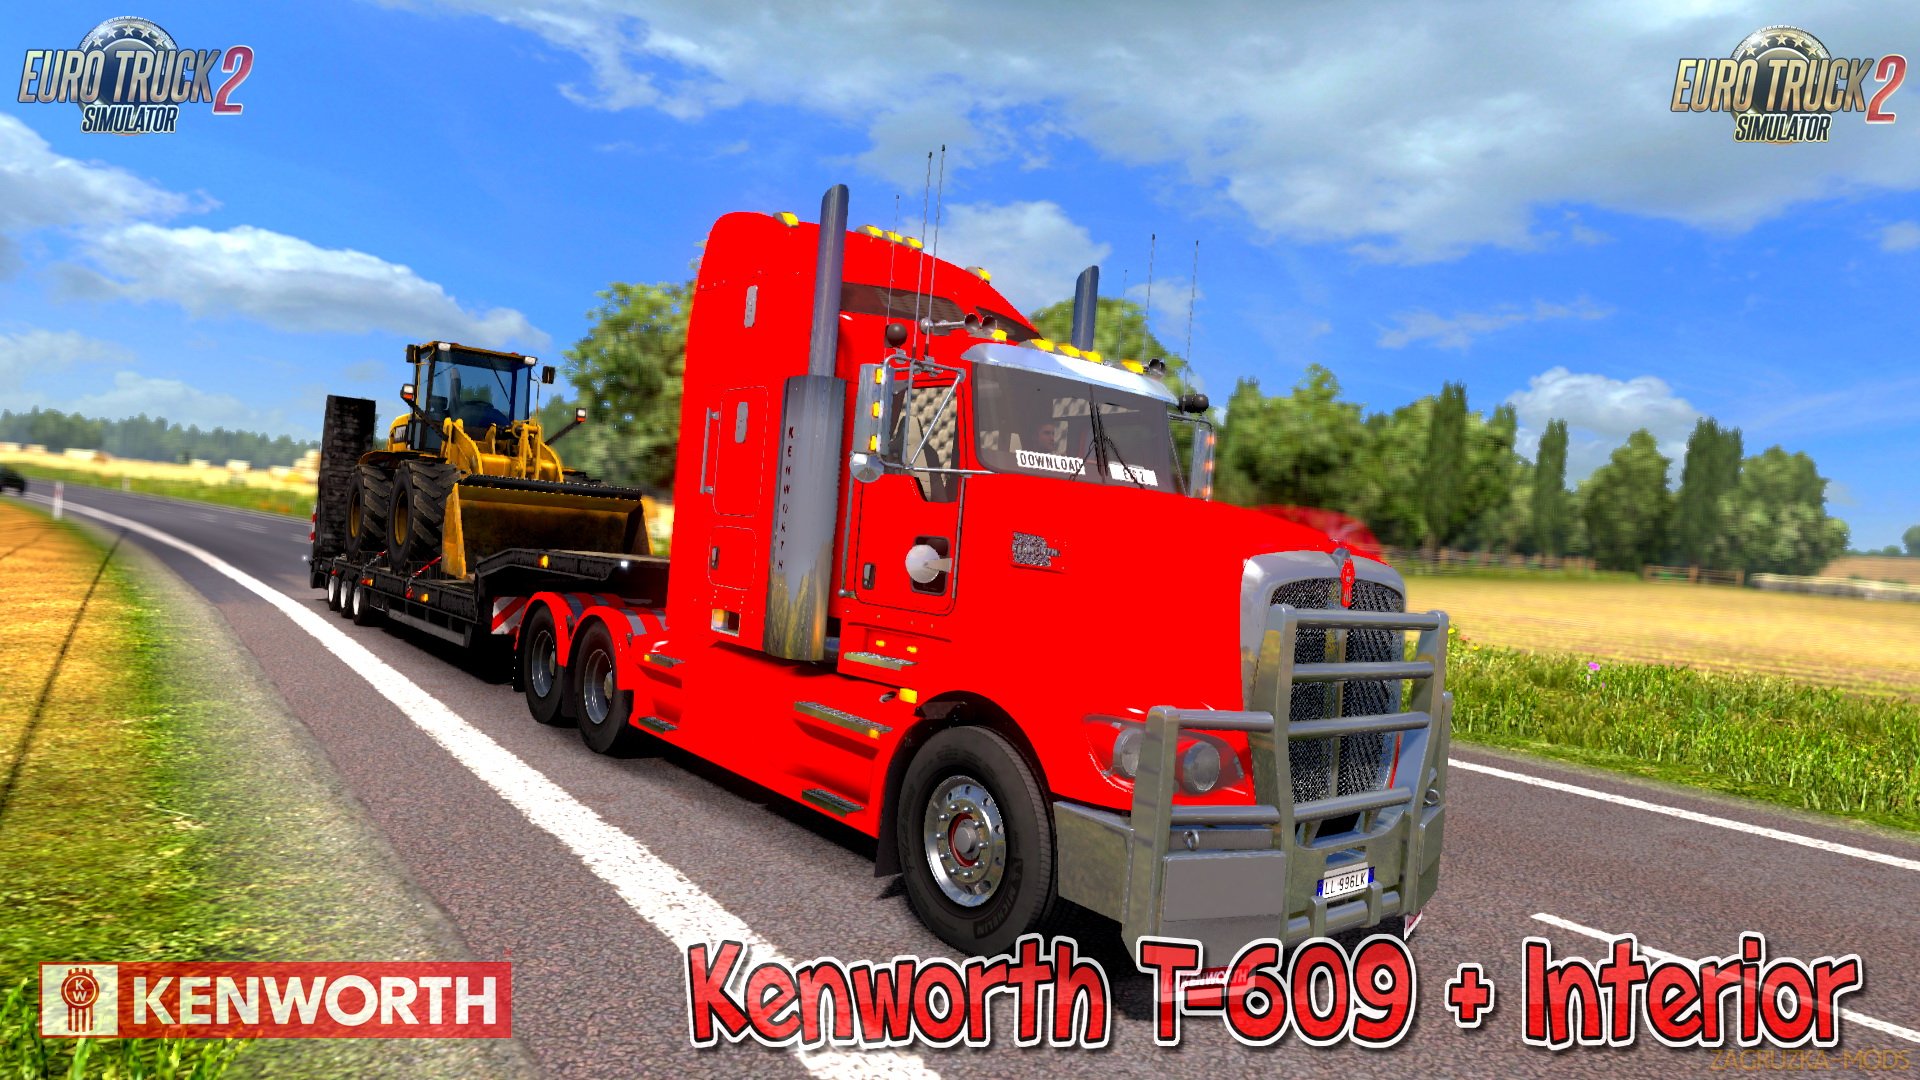 Kenworth T-609 + Interior v1.0 by RTA-Team (1.28.x) for ETS 2